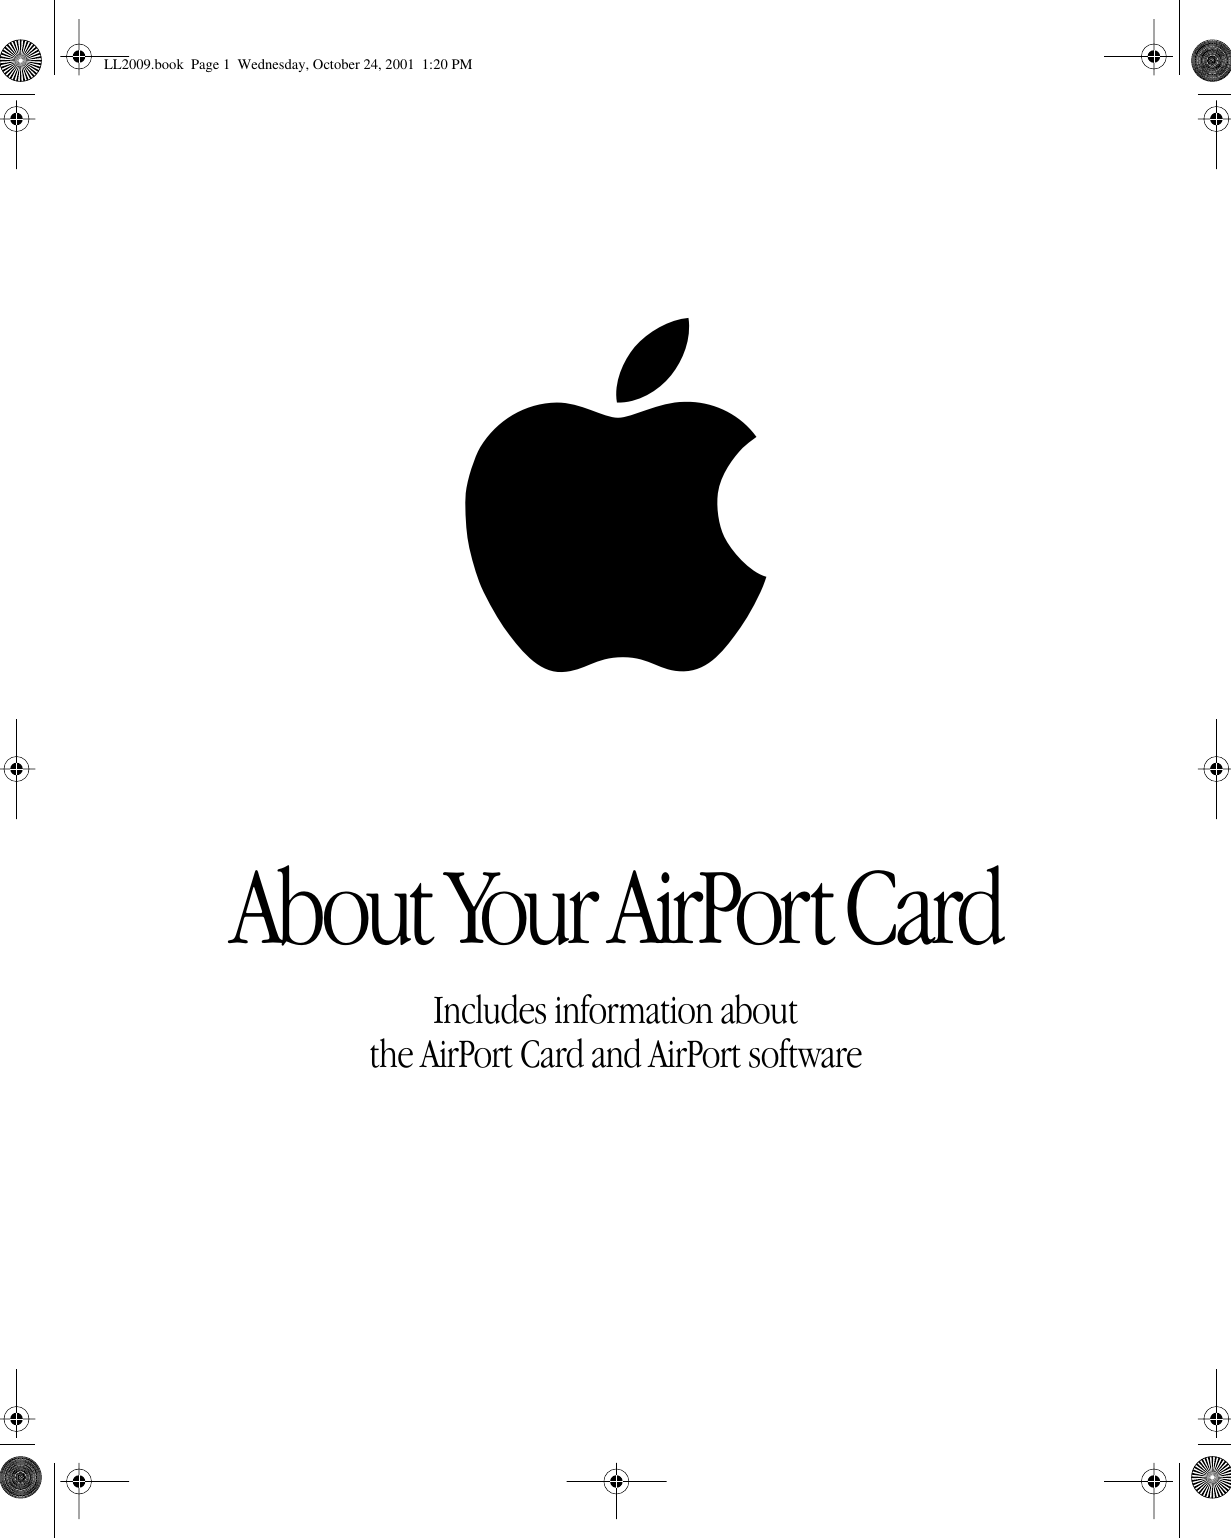   About Your AirPort Card Includes information aboutthe AirPort Card and AirPort software LL2009.book  Page 1  Wednesday, October 24, 2001  1:20 PM